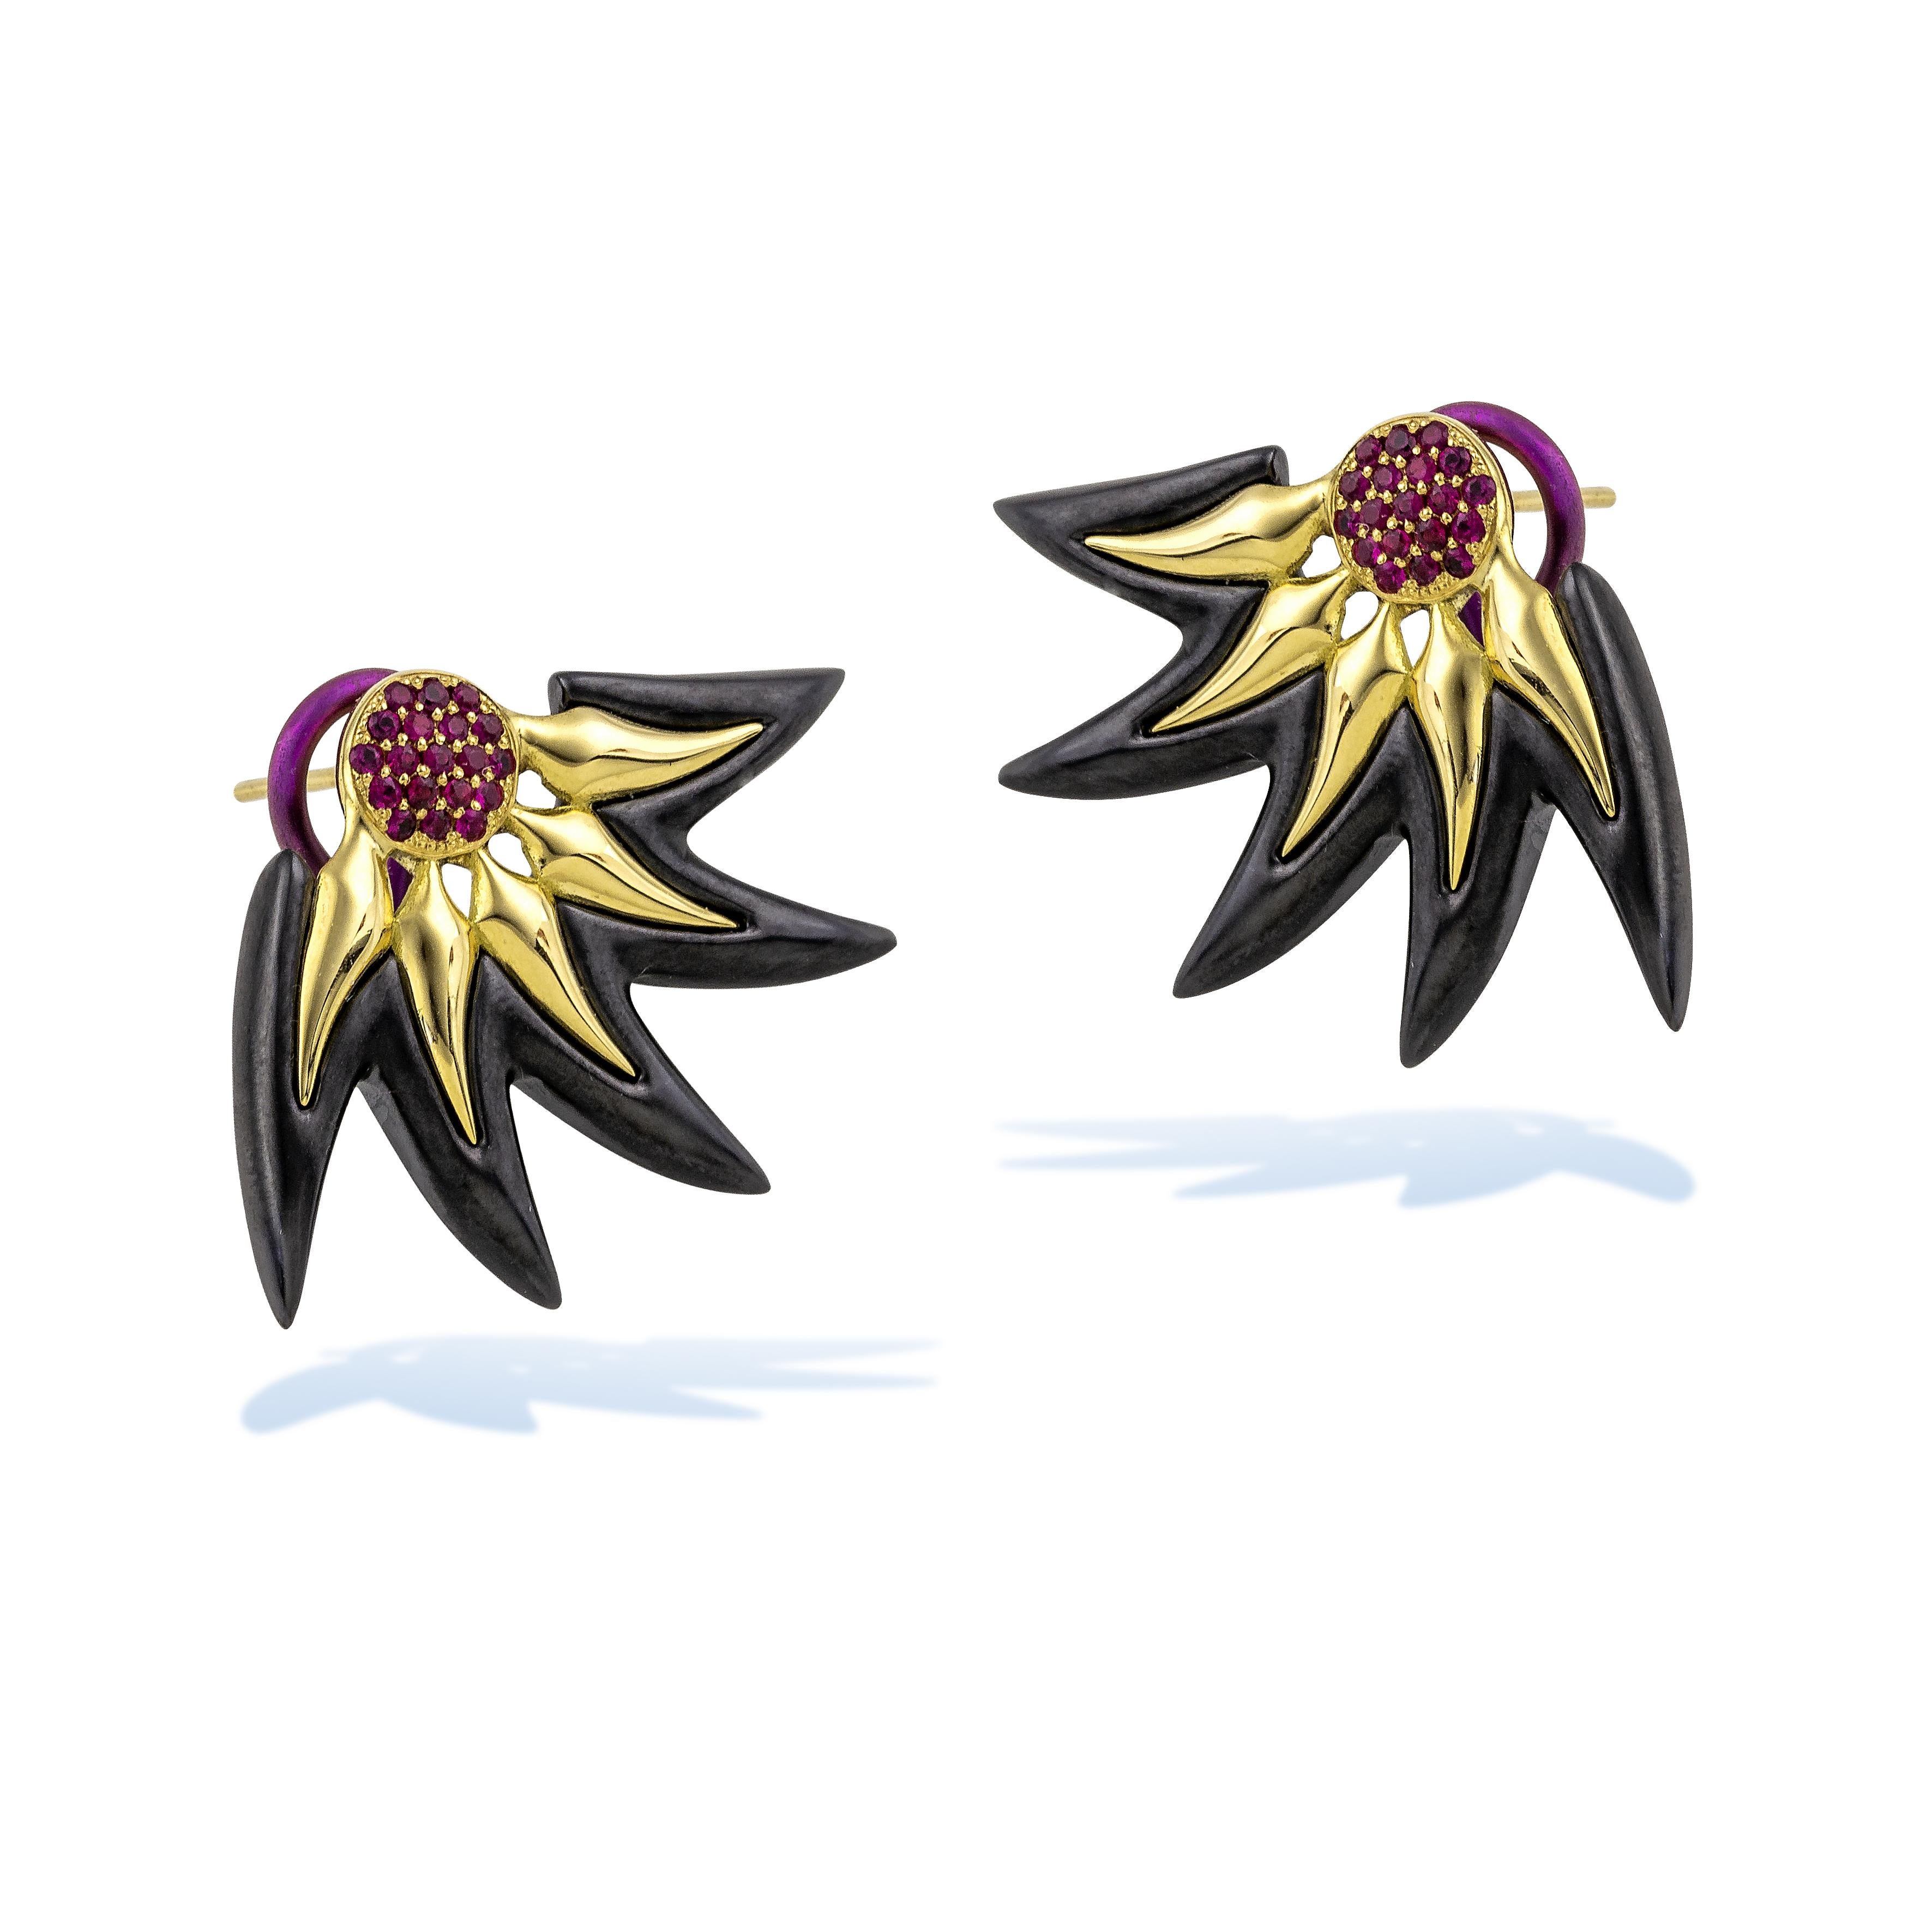 Flame Stud Earrings by Vasilis Giampouras at Second Petale Gallery
This fashionable pair of earrings combines Black Titanium, 18K Gold, and rubies to create an enchanting effect, making them a bold statement for those who appreciate the fusion of